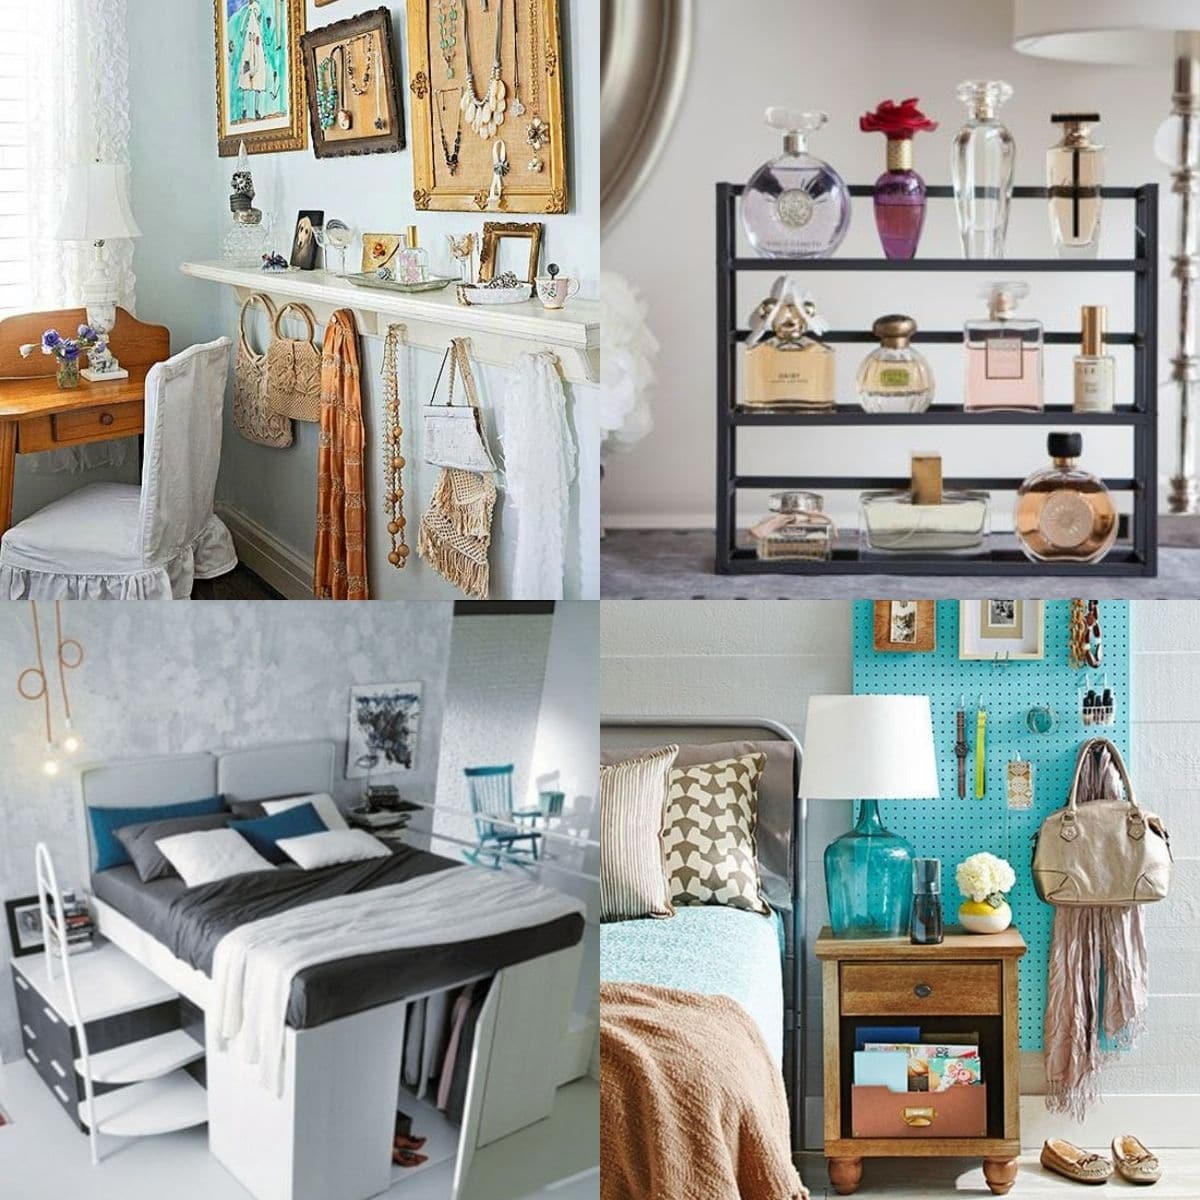 Increase storage in your small rooms with the fun hacks.

Keep your room both organized and stylish. 😉

#Storage #StorageIDeas #StorageSpace #SmallRooms #SmallRoomStorage #SmallRoomStorageIDeas
 #barbehomes
 LocalInfoForYou.com/234965/small-r…